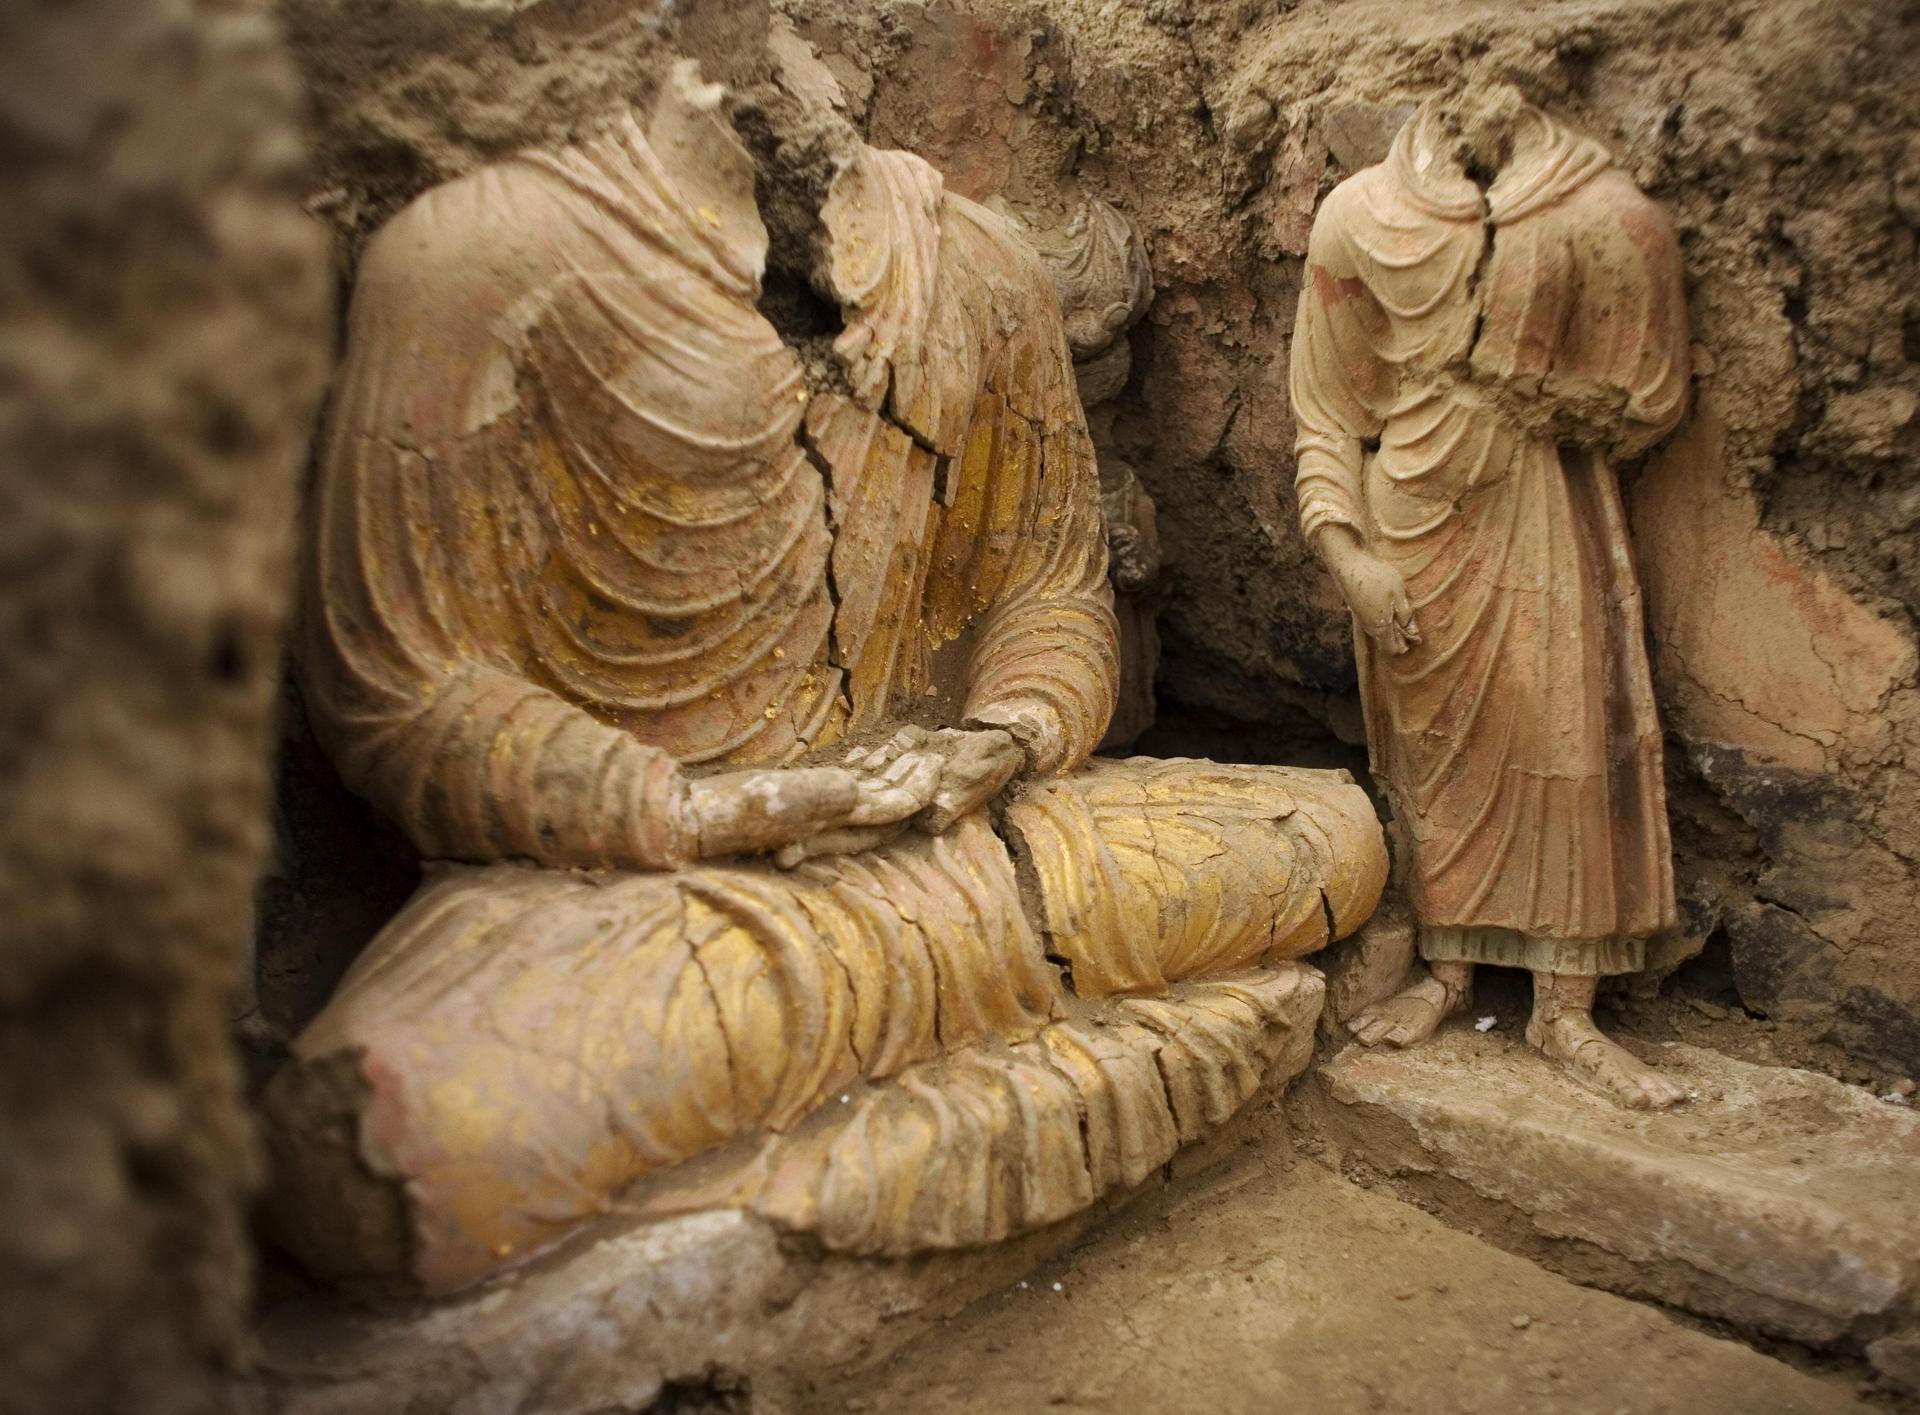 Remains of Buddha statues inside an ancient temple in Mes Aynak, Afghanistan. Photos: AP; AFP; FlickrVision; Andy Miller